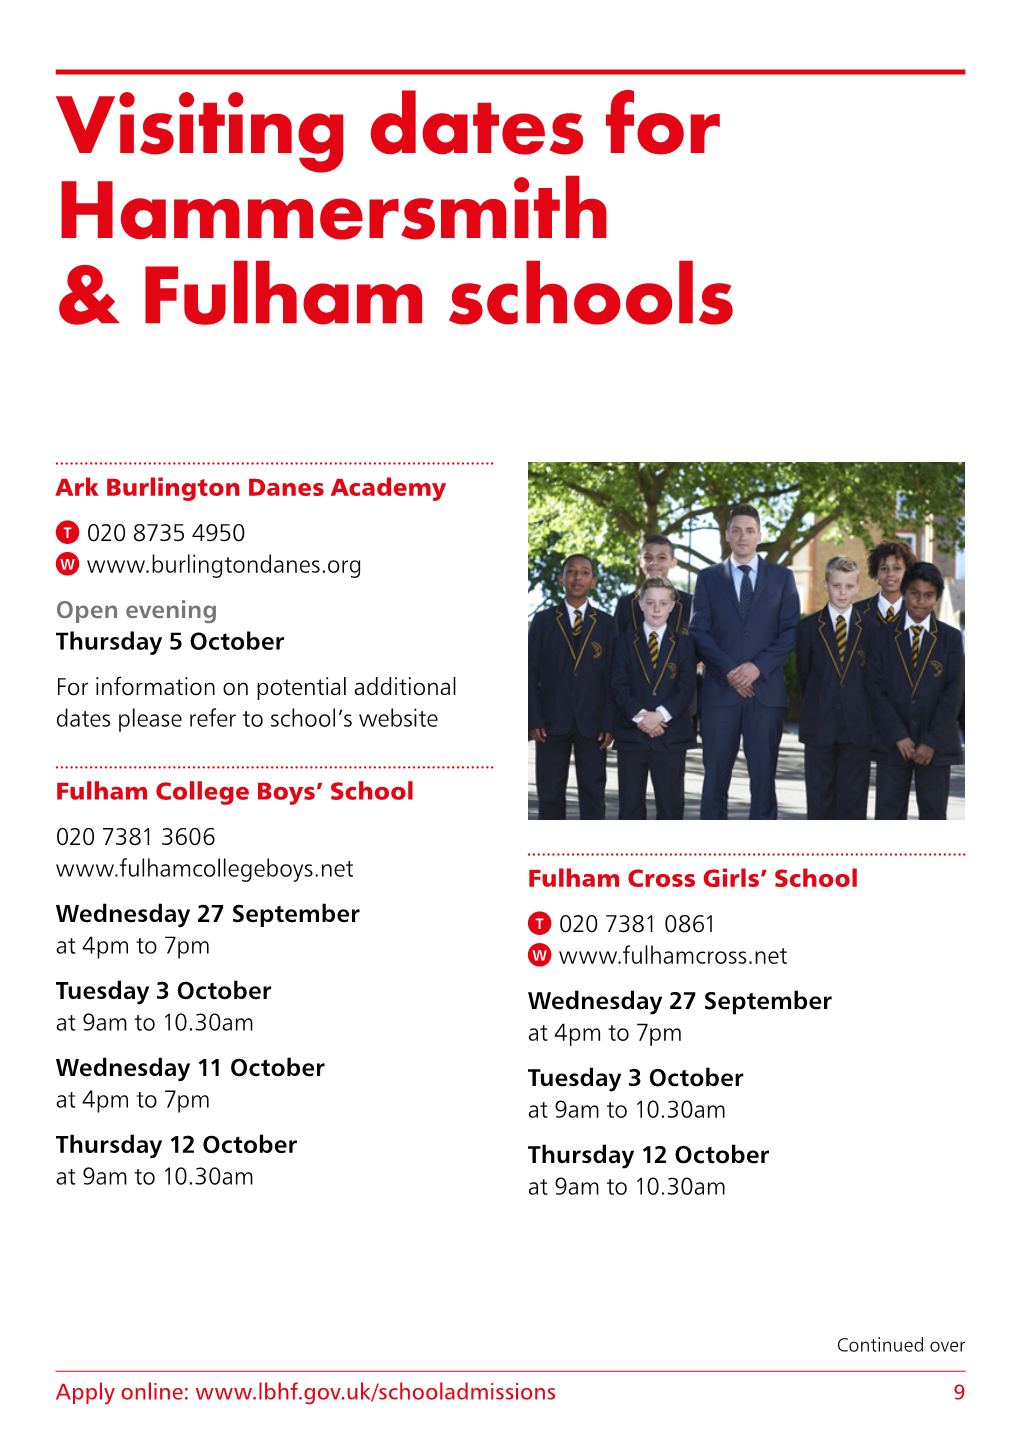 Visiting Dates for Hammersmith & Fulham Schools